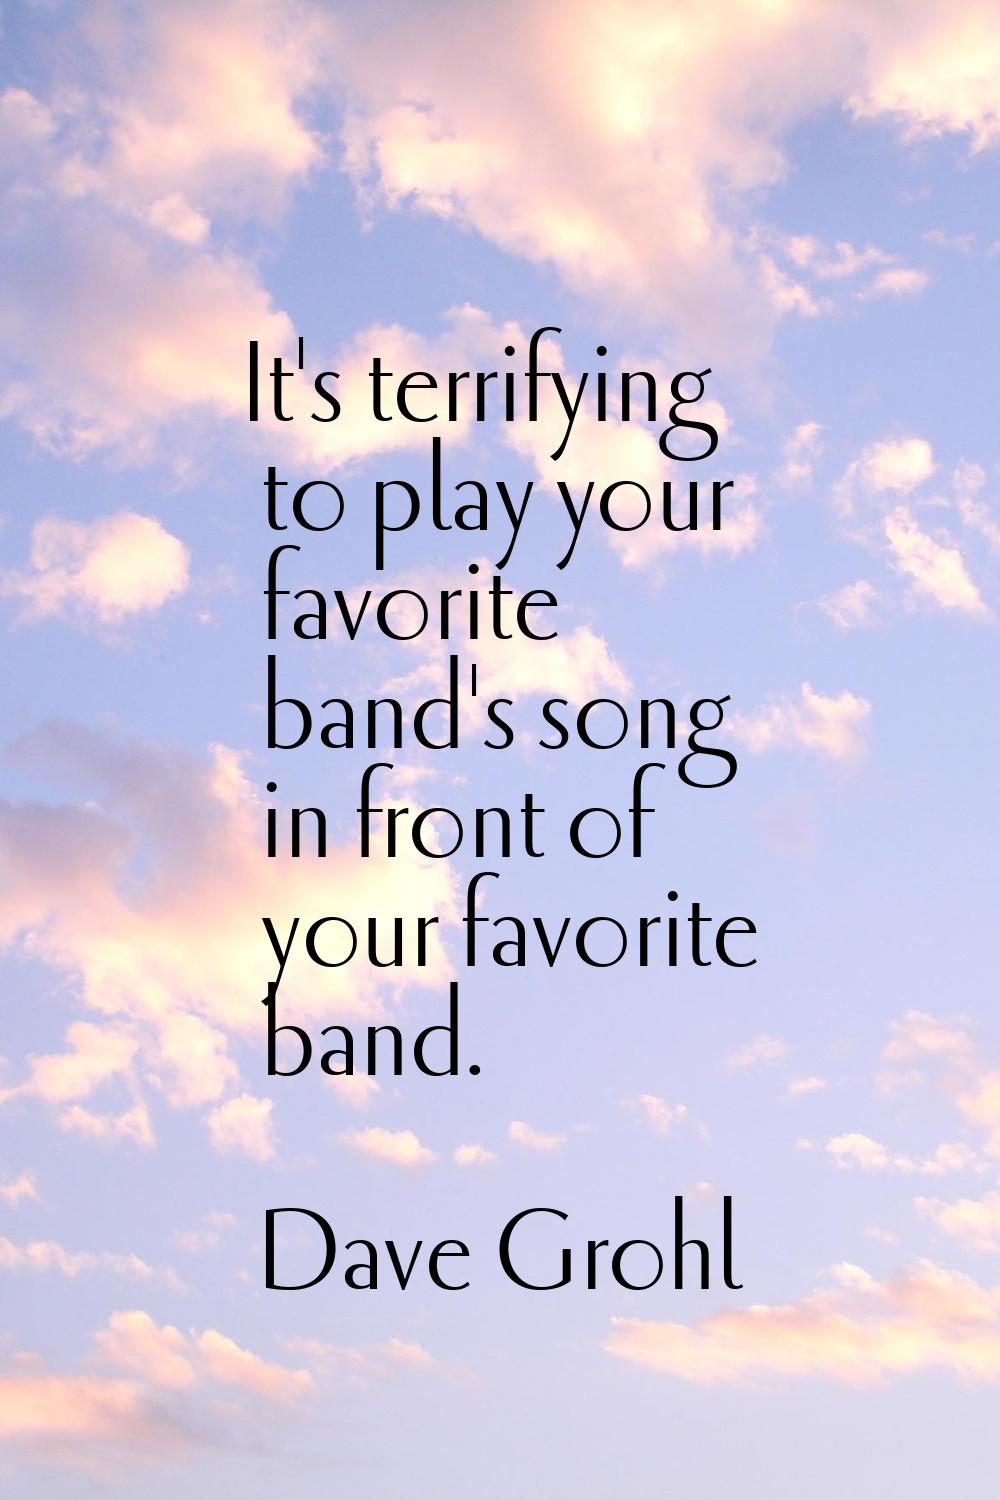 It's terrifying to play your favorite band's song in front of your favorite band.